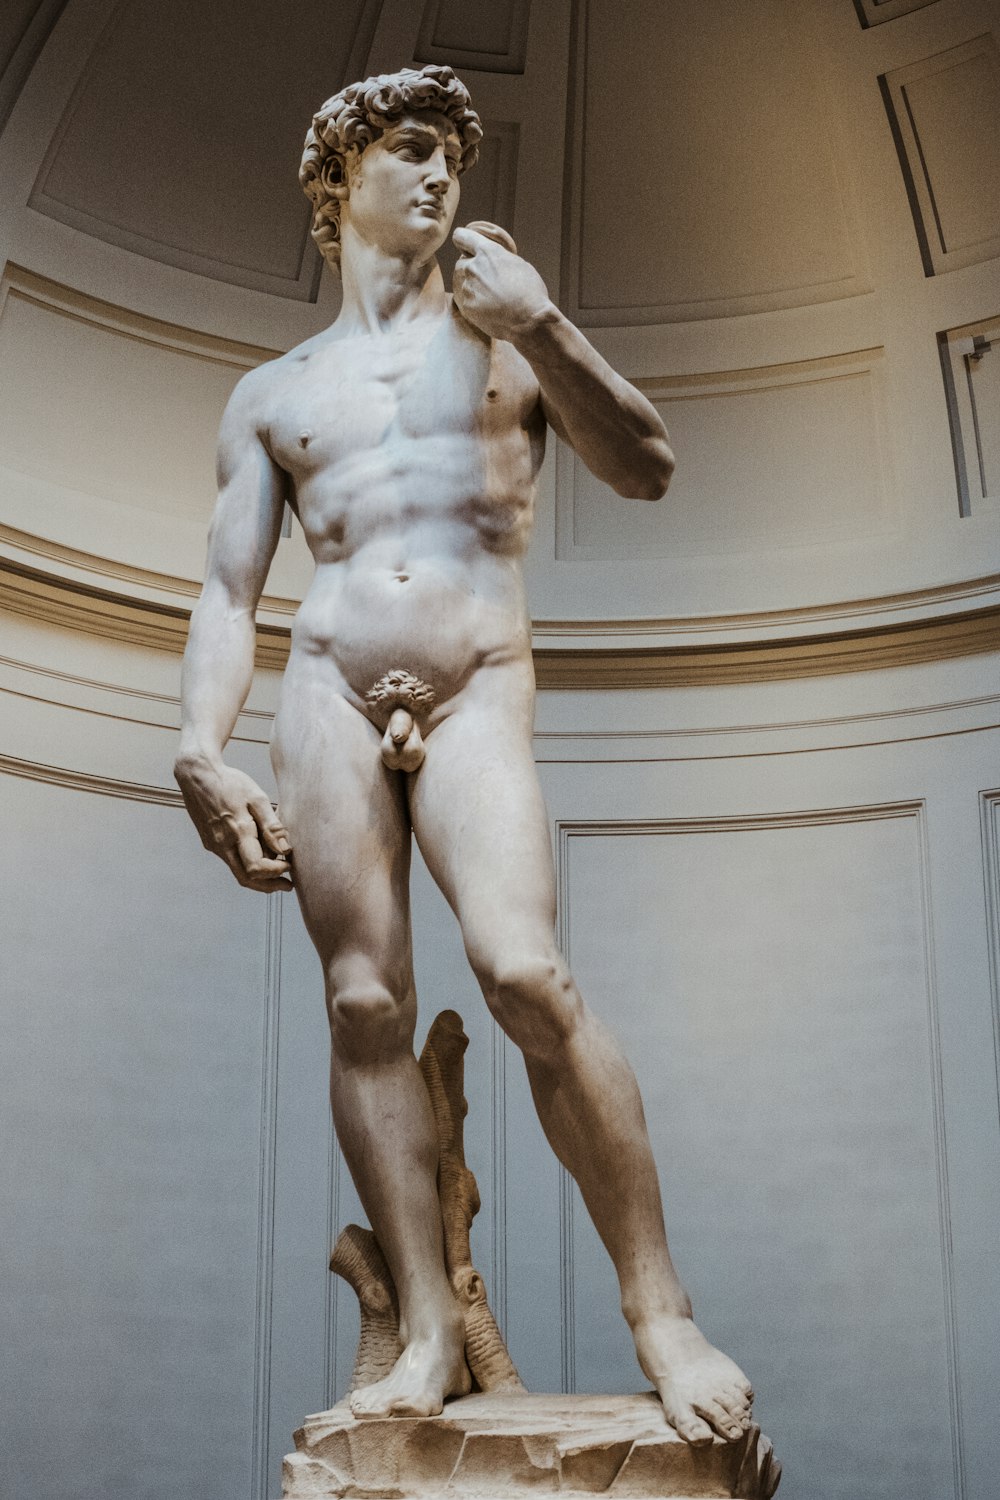 a statue of a man with no shirt on